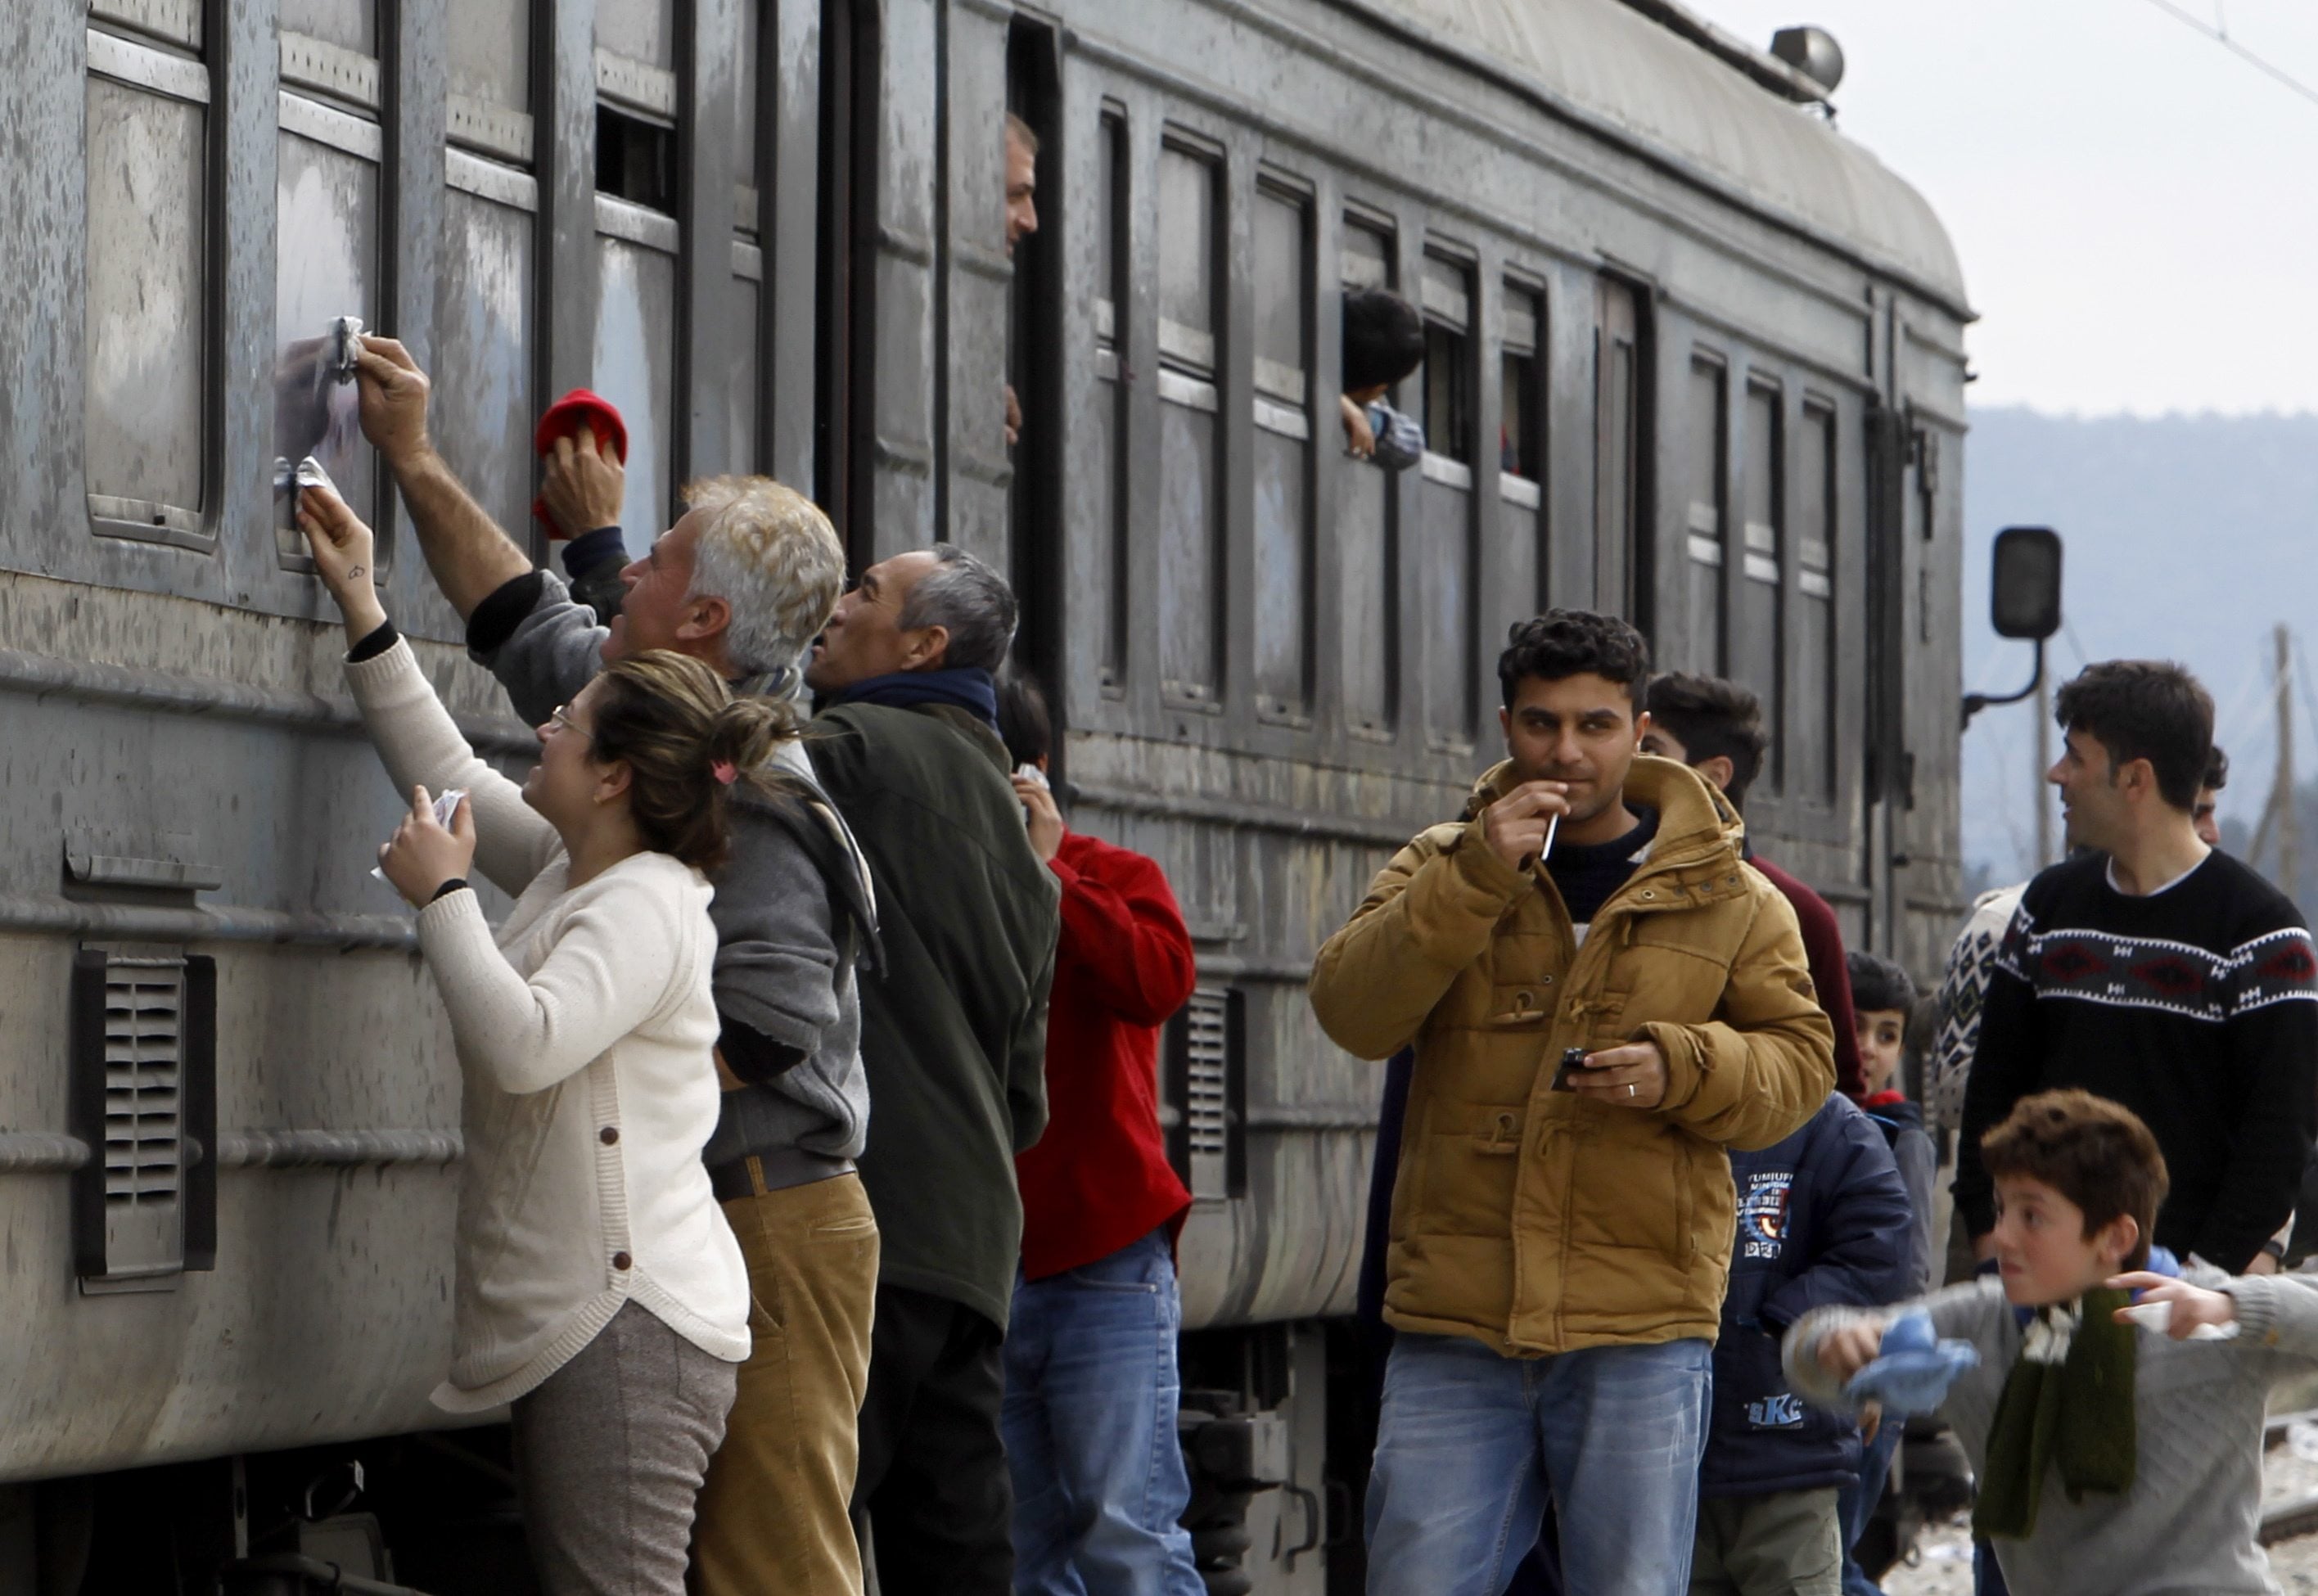 Refugees clean windows of a train before departing towards Serbia, at the transit center for refugees, near the southern Macedonia&#039;s town of Gevgelija, Monday. European Union nations anxious to stem the flow of asylum-seekers coming through the Balkans are increasingly considering sending more help to non-member Macedonia as a better way to protect European borders instead of relying on EU member Greece. Macedonia started reinforcing the border fence with Greece, doubling it with another fence, which is expected to increase the control of the migrant flow.